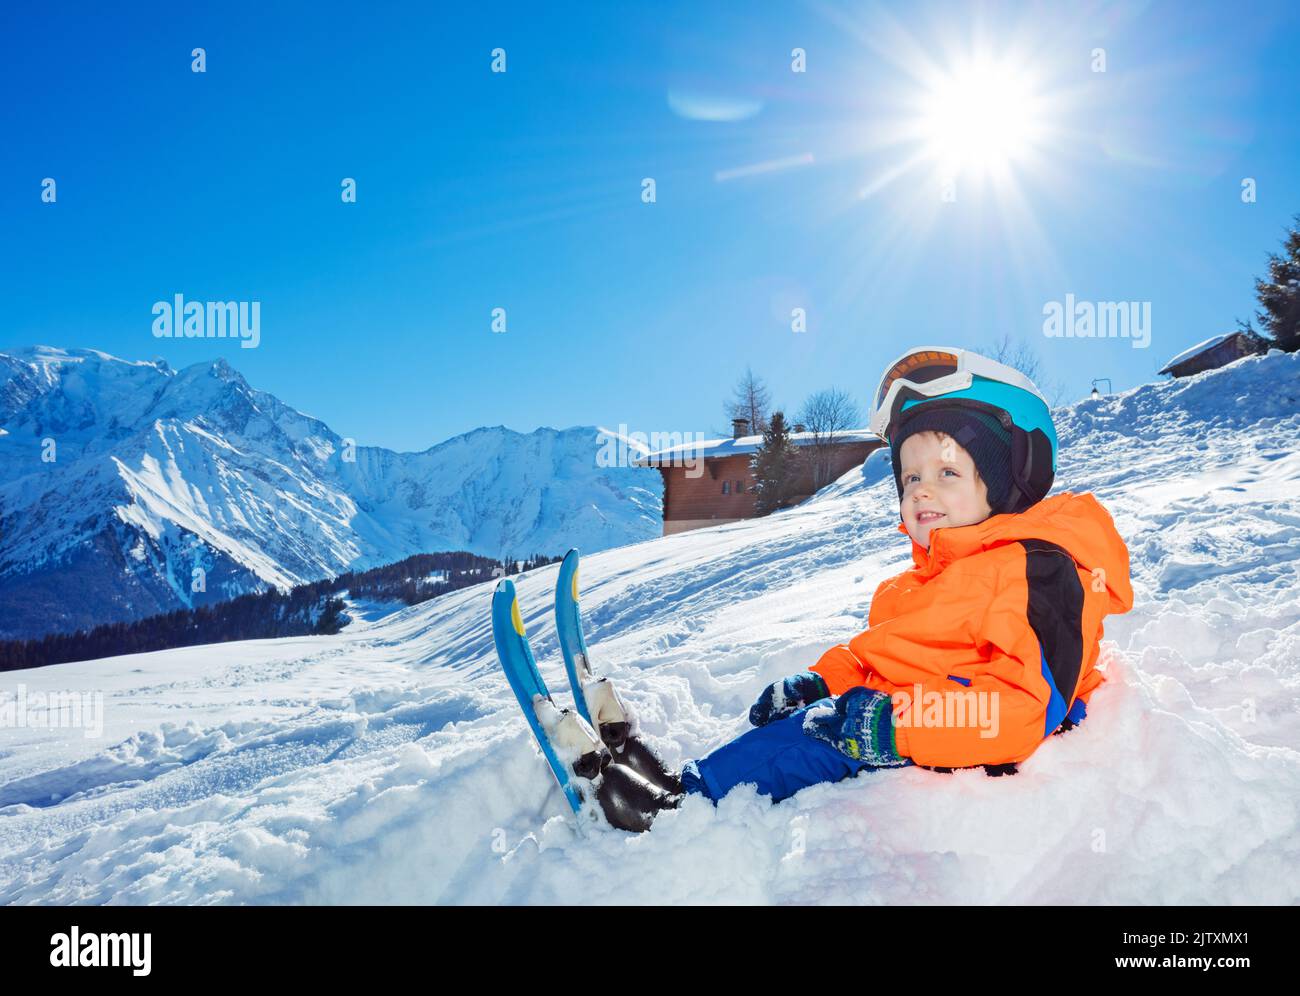 Smiling Boy with ski ready for skiing school sit in snow Stock Photo